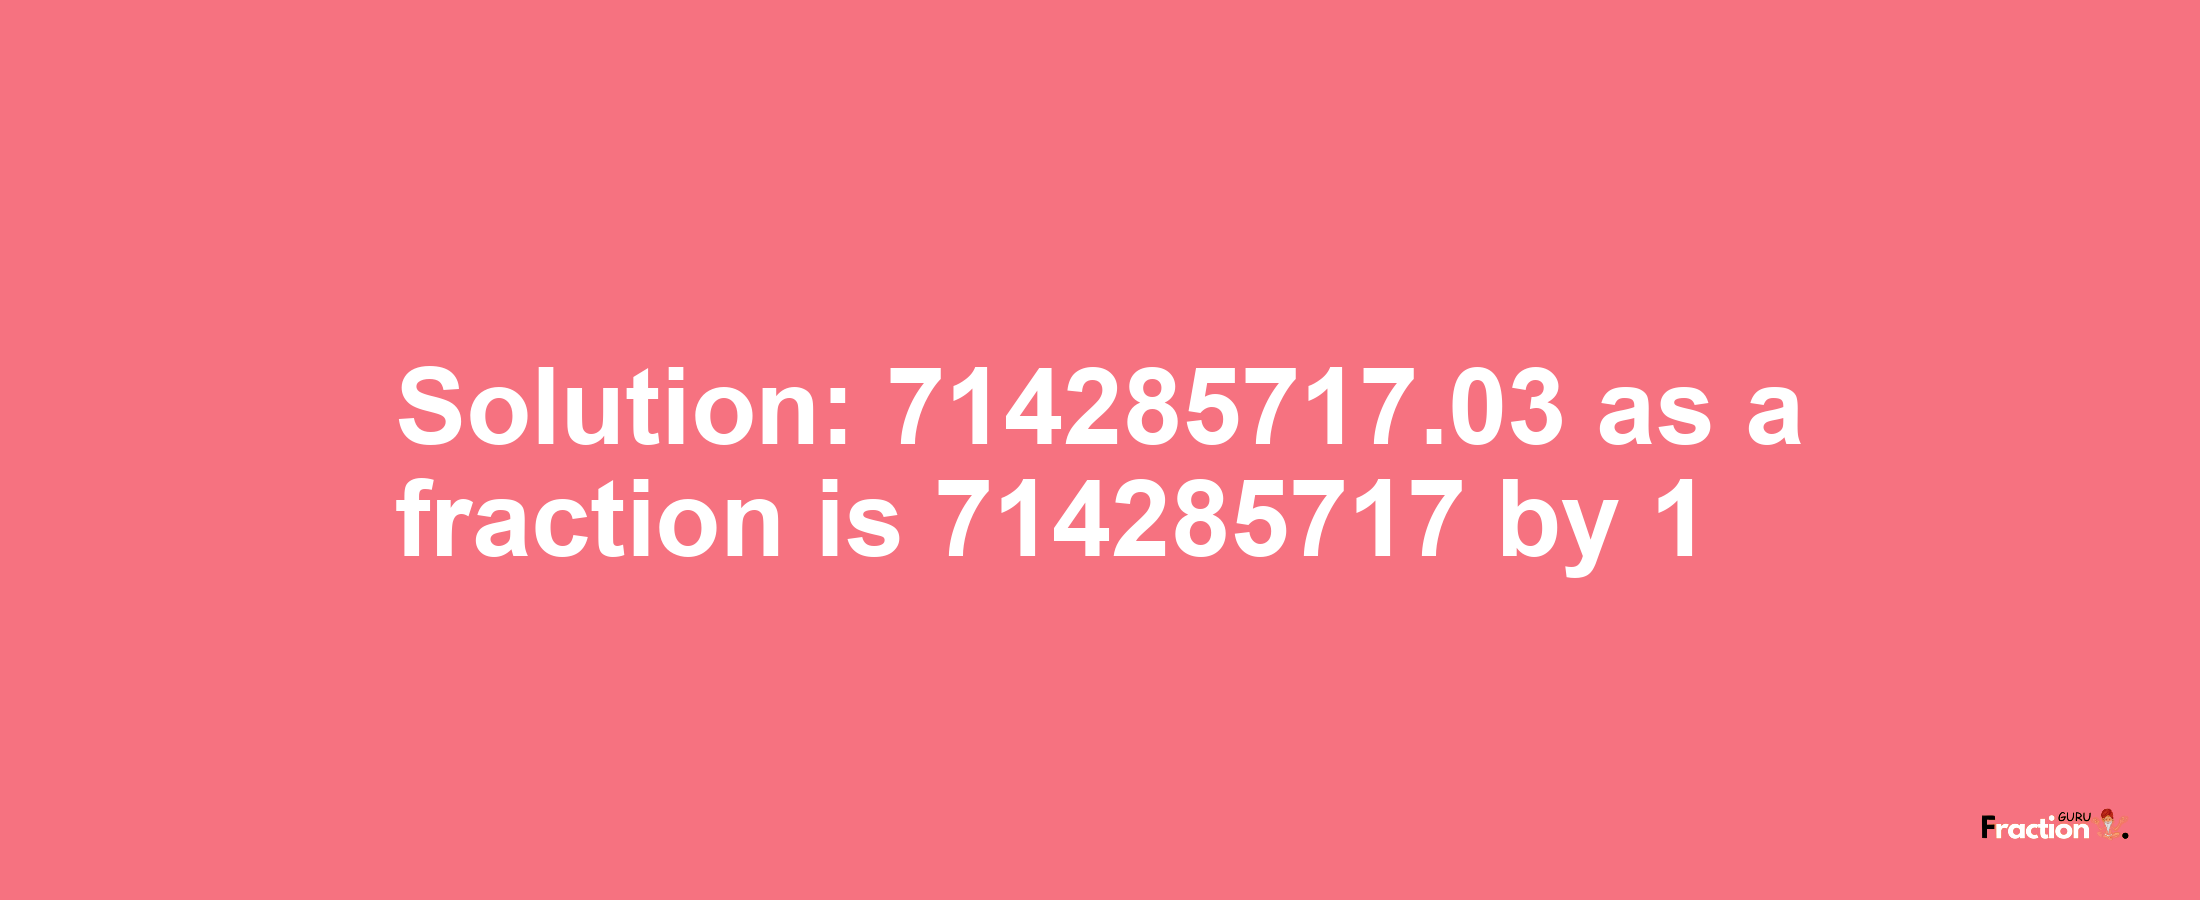 Solution:714285717.03 as a fraction is 714285717/1